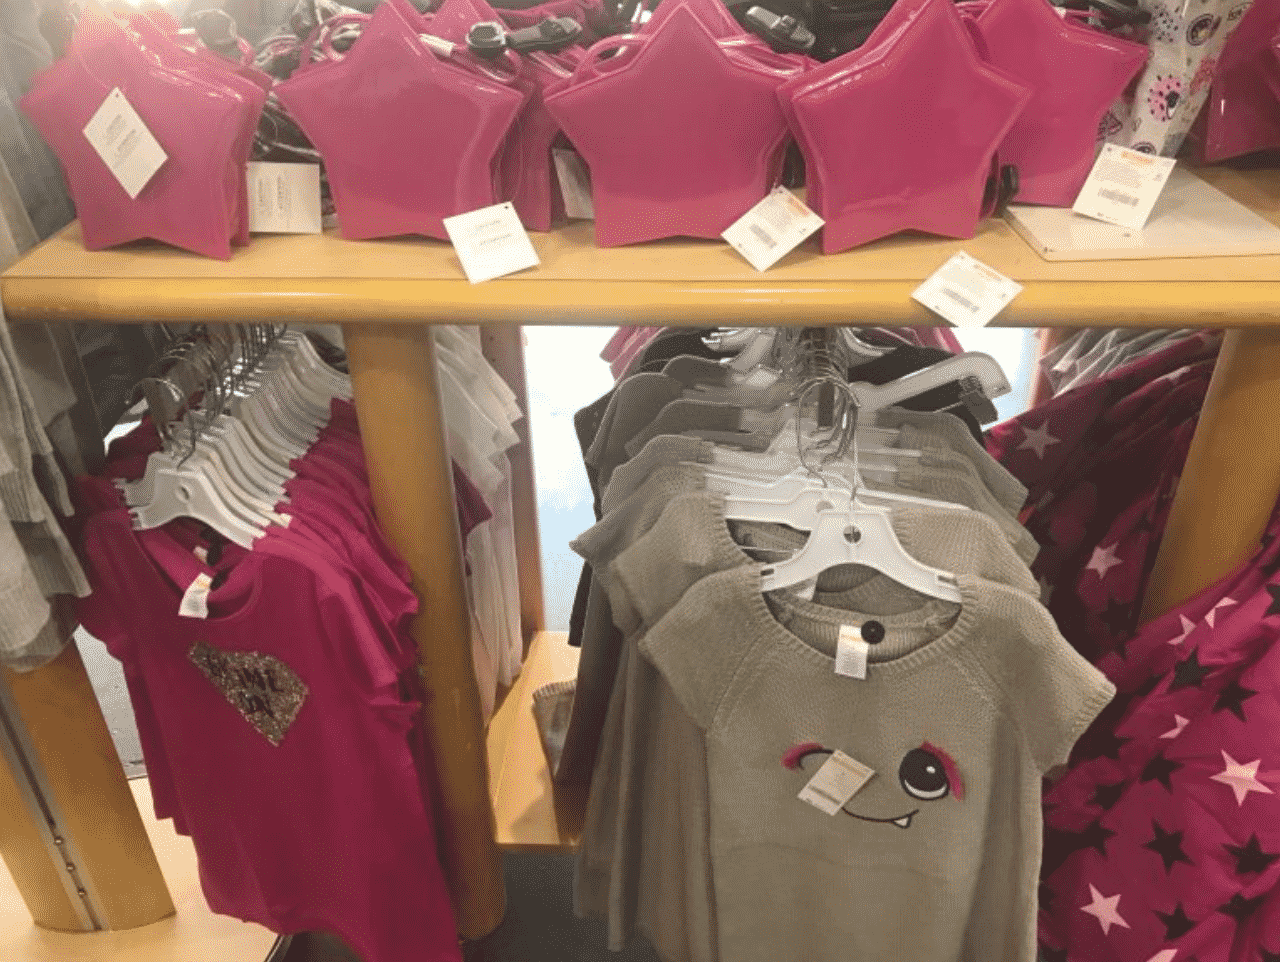 Display from Gymboree which features a range of shirts and sweaters with a matching handbag as an example of retail store layout